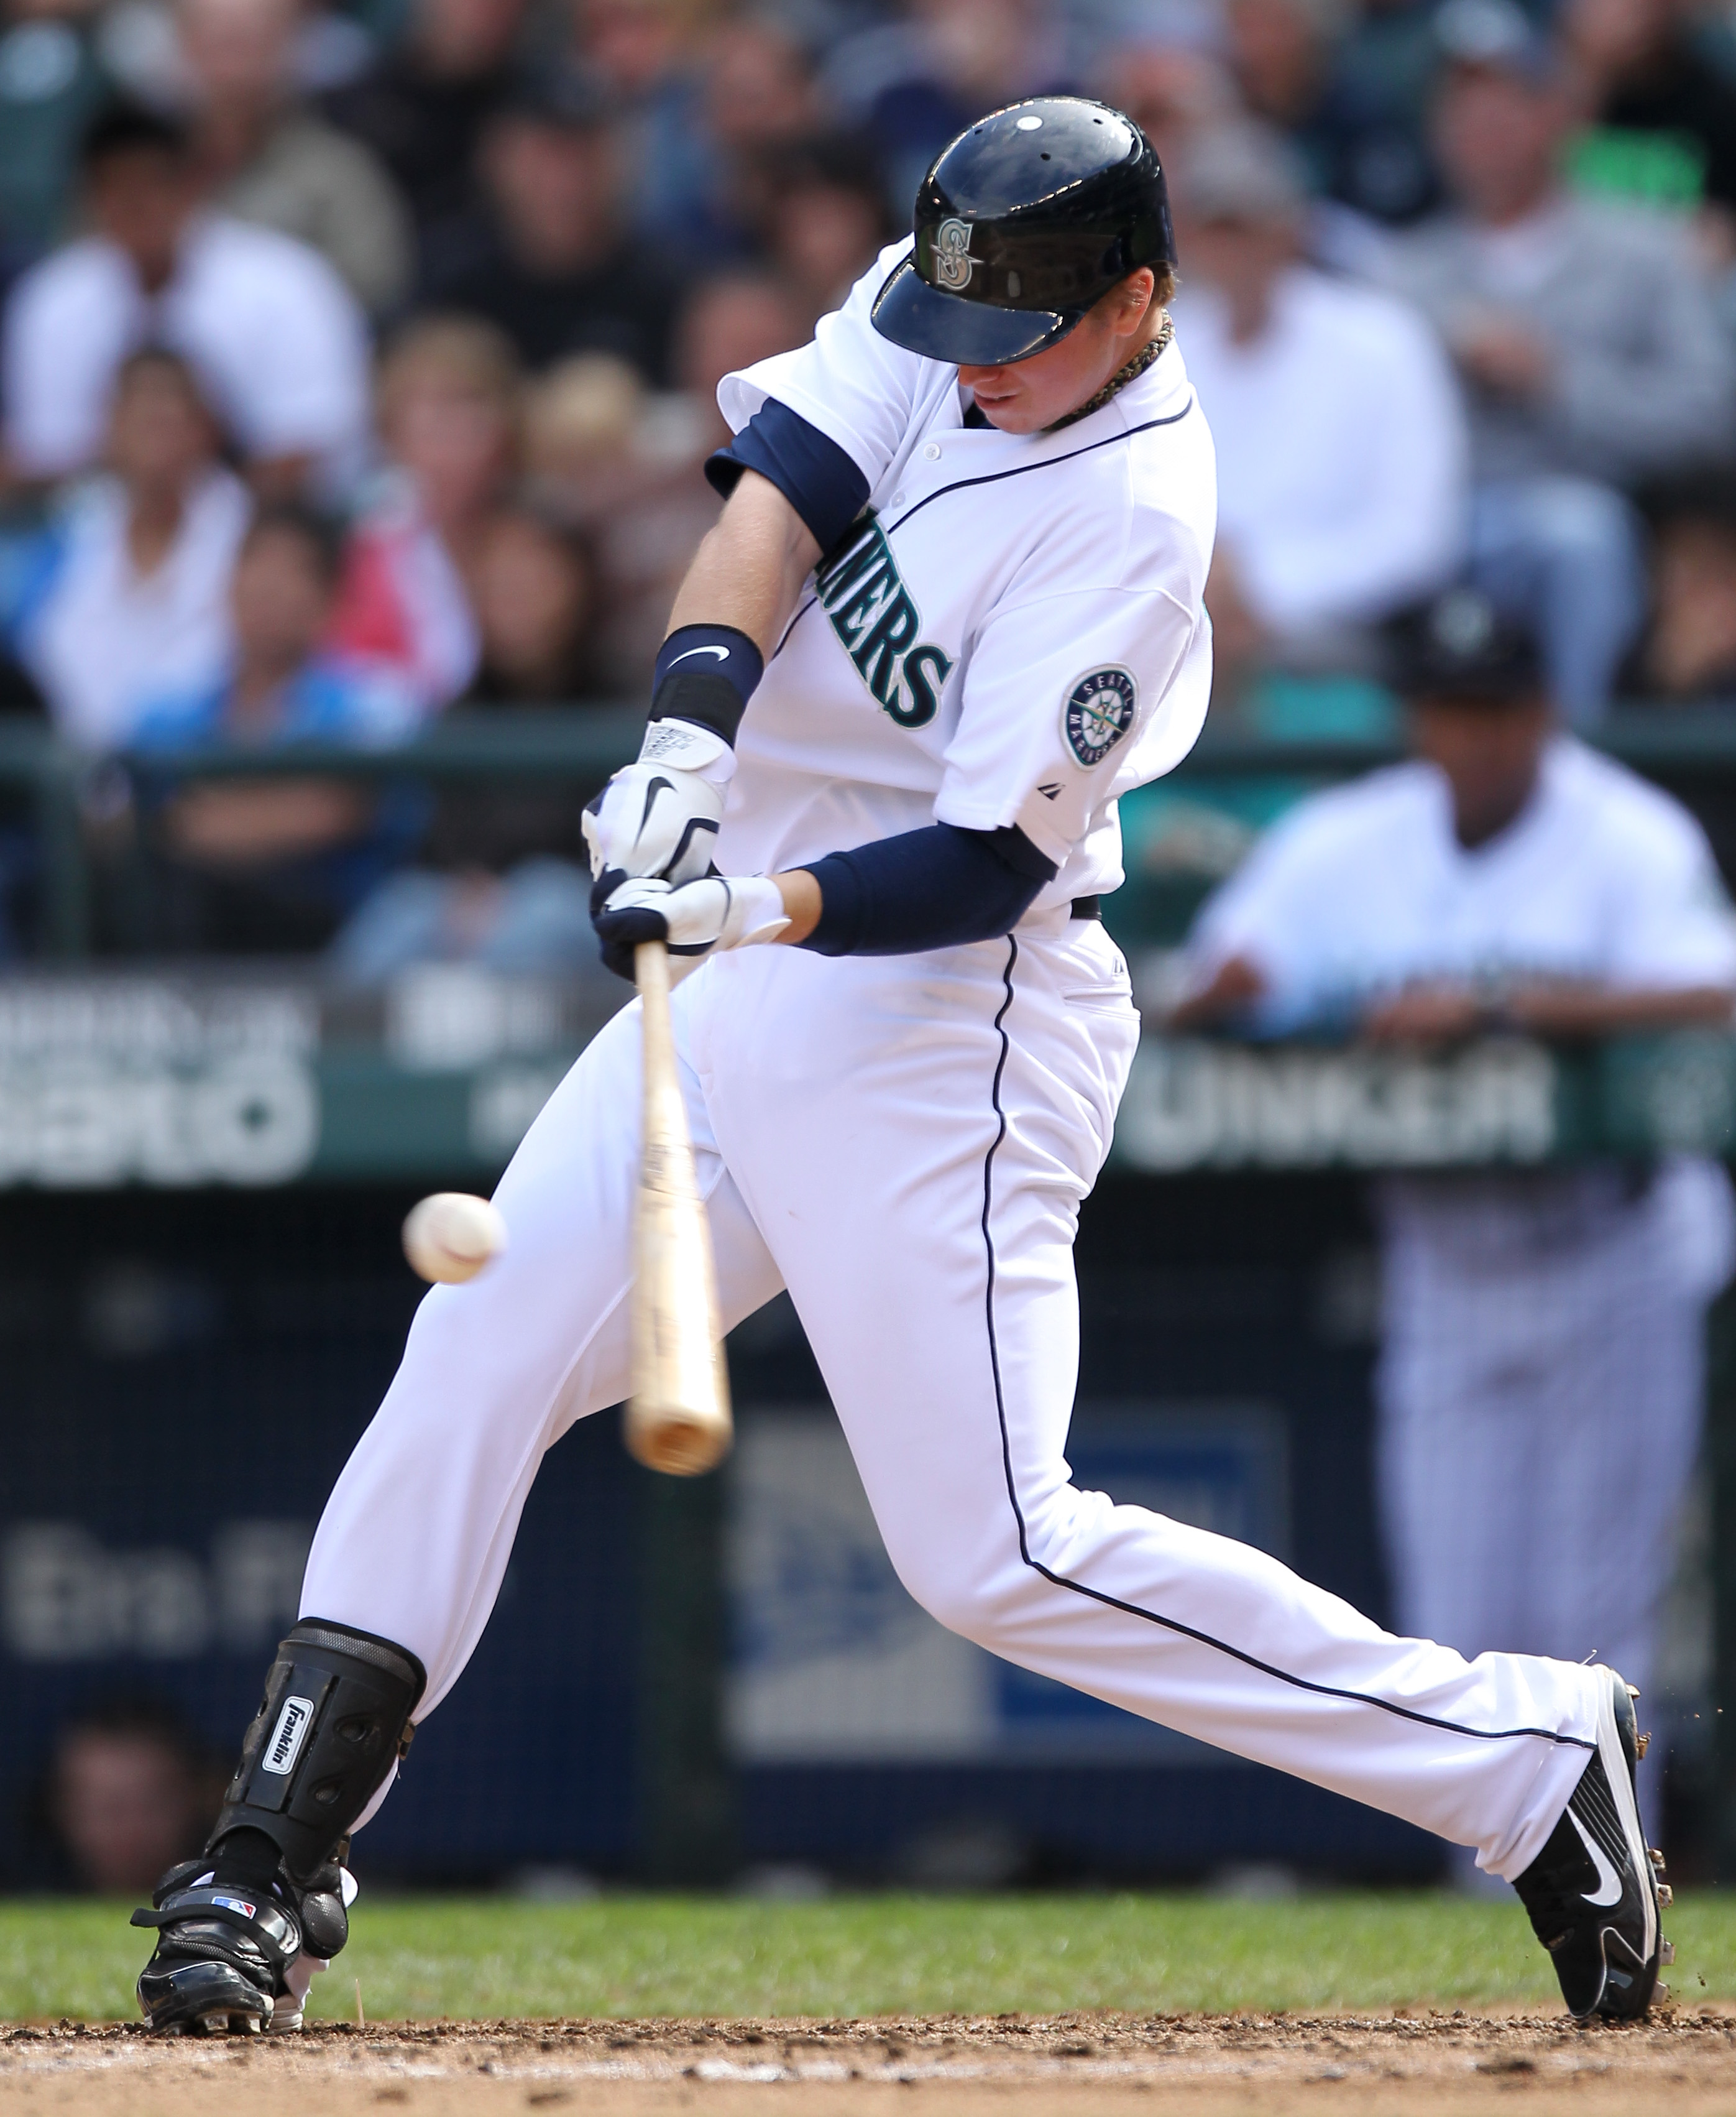 SEATTLE - SEPTEMBER 19:  Justin Smoak #17 of the Seattle Mariners bats against the Texas Rangers at Safeco Field on September 19, 2010 in Seattle, Washington. (Photo by Otto Greule Jr/Getty Images)